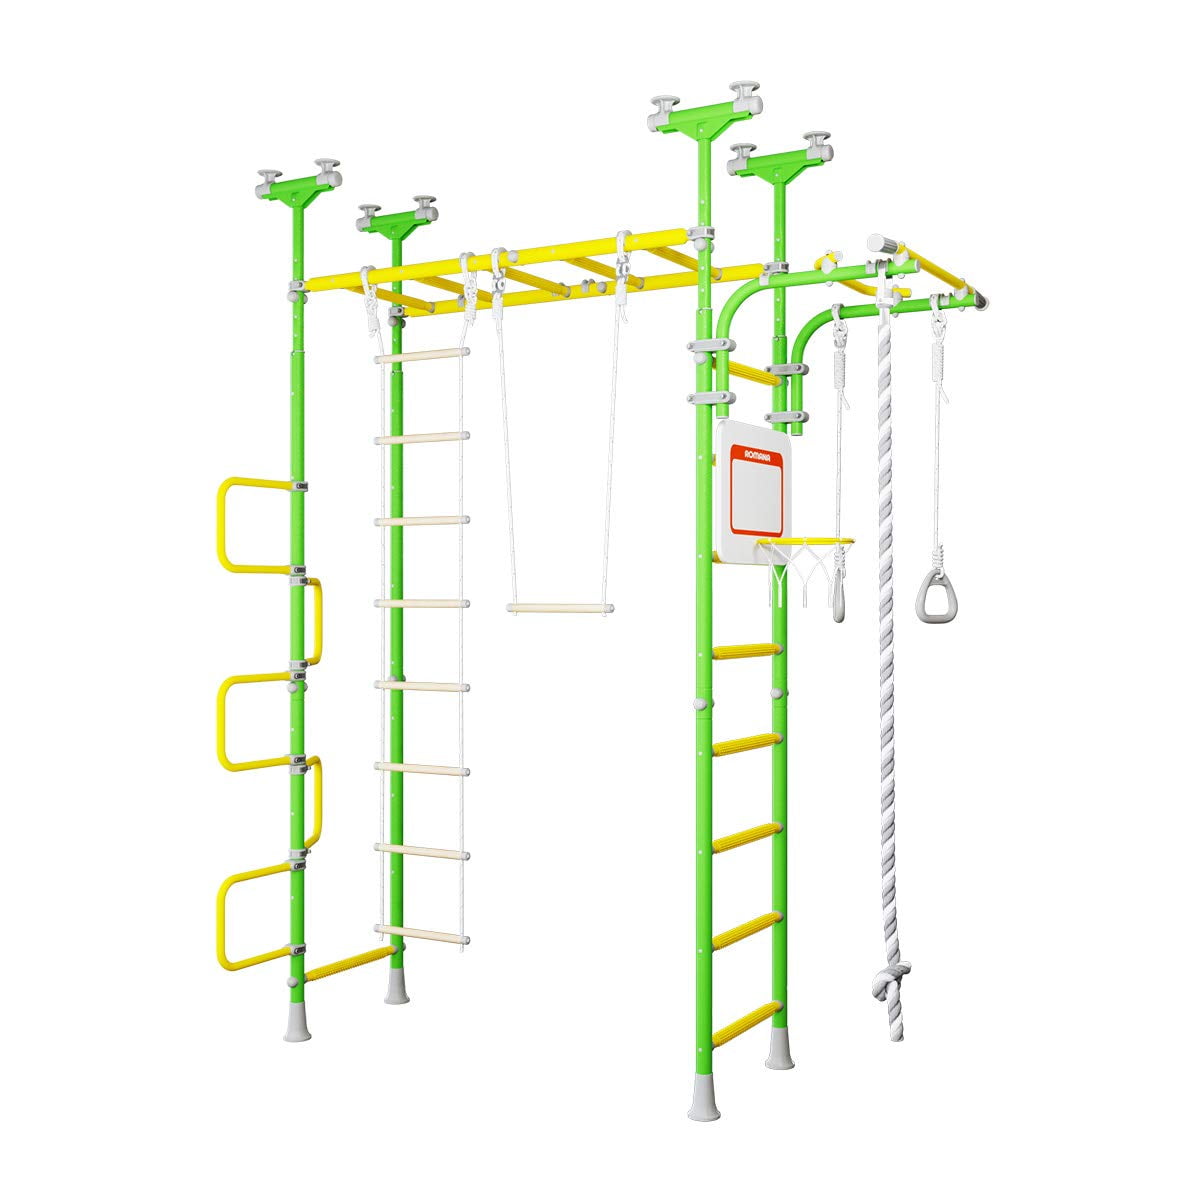 Vertical-10 Kid's Home Gym Swedish Wall with Swing and Accessories 